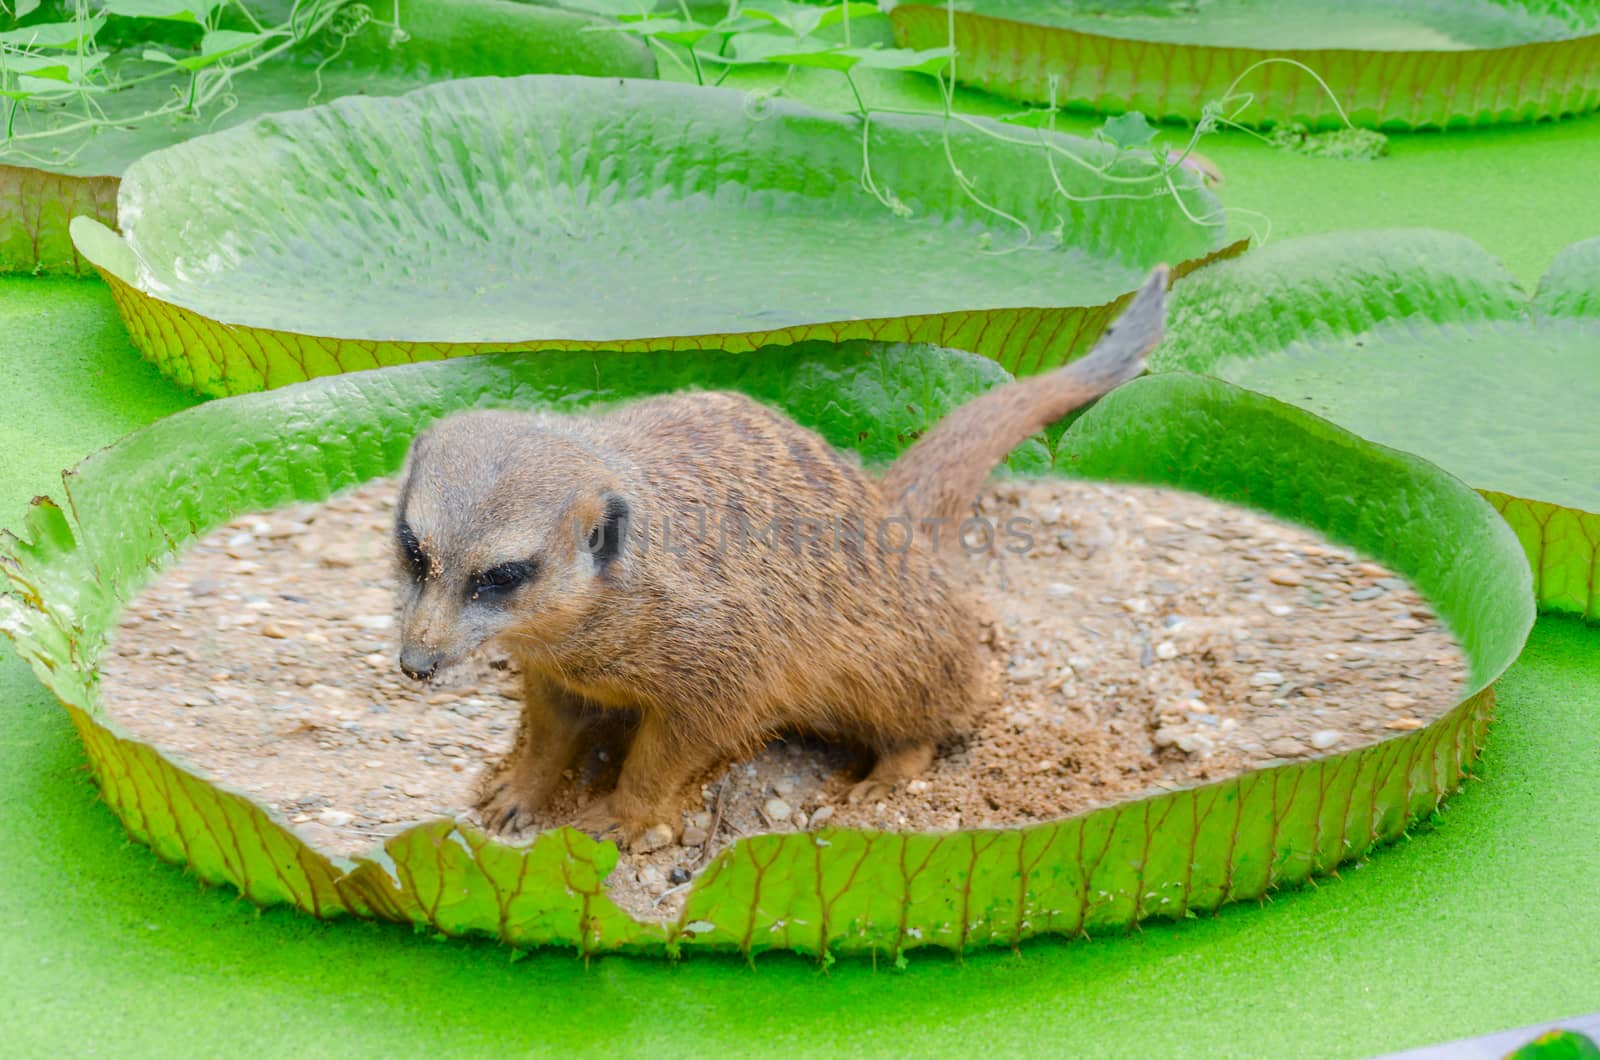 Meerkats toilet. Ermännchen on a lily pad 
With the largest leaves in the world, the Victoria water lily or even the Amazon water lily called.